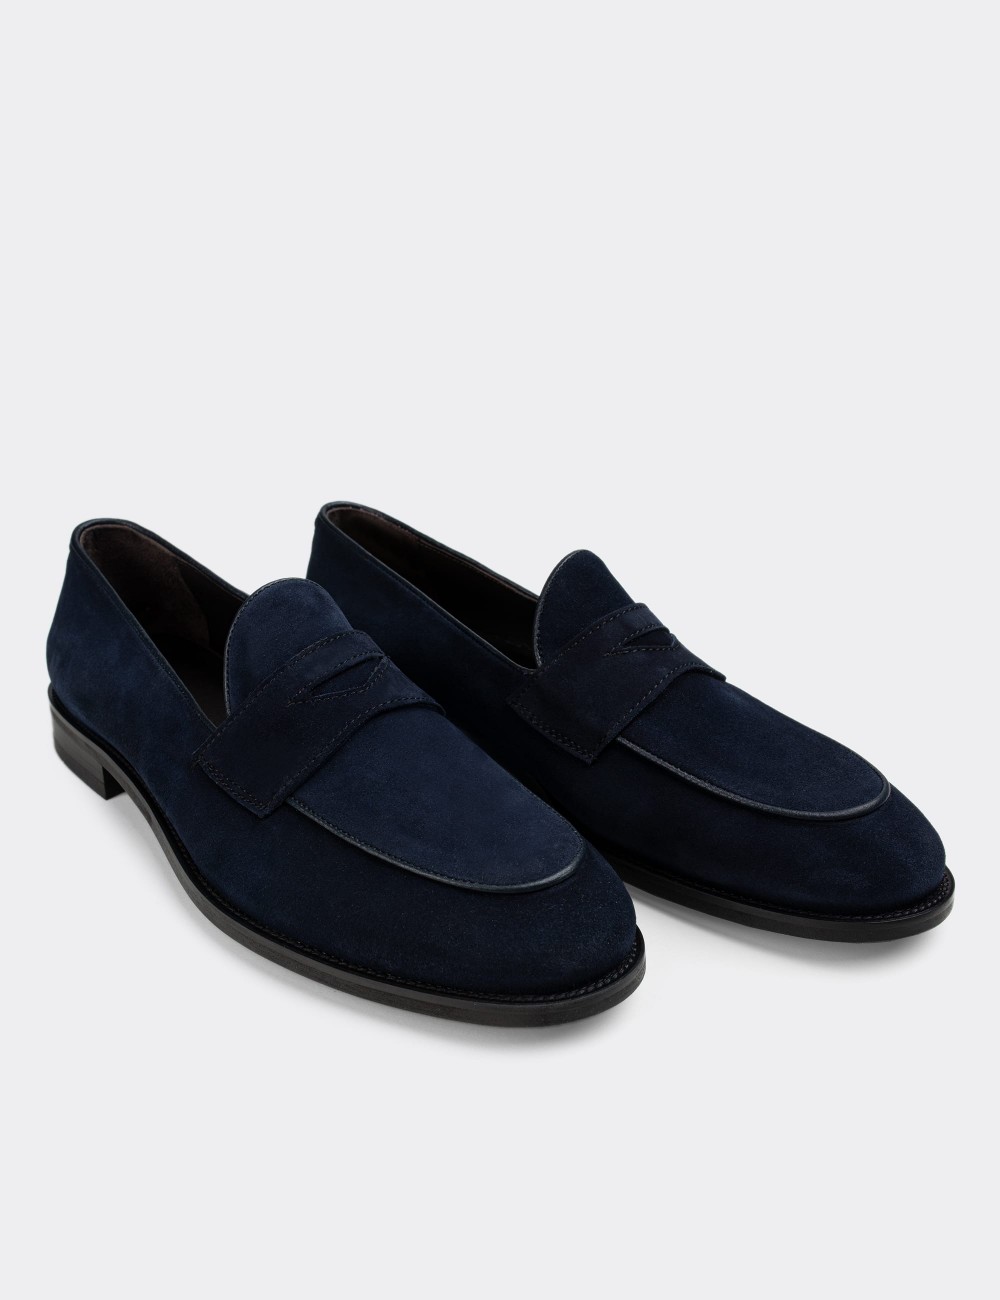 Navy Suede Leather Loafers - 01845MLCVN01